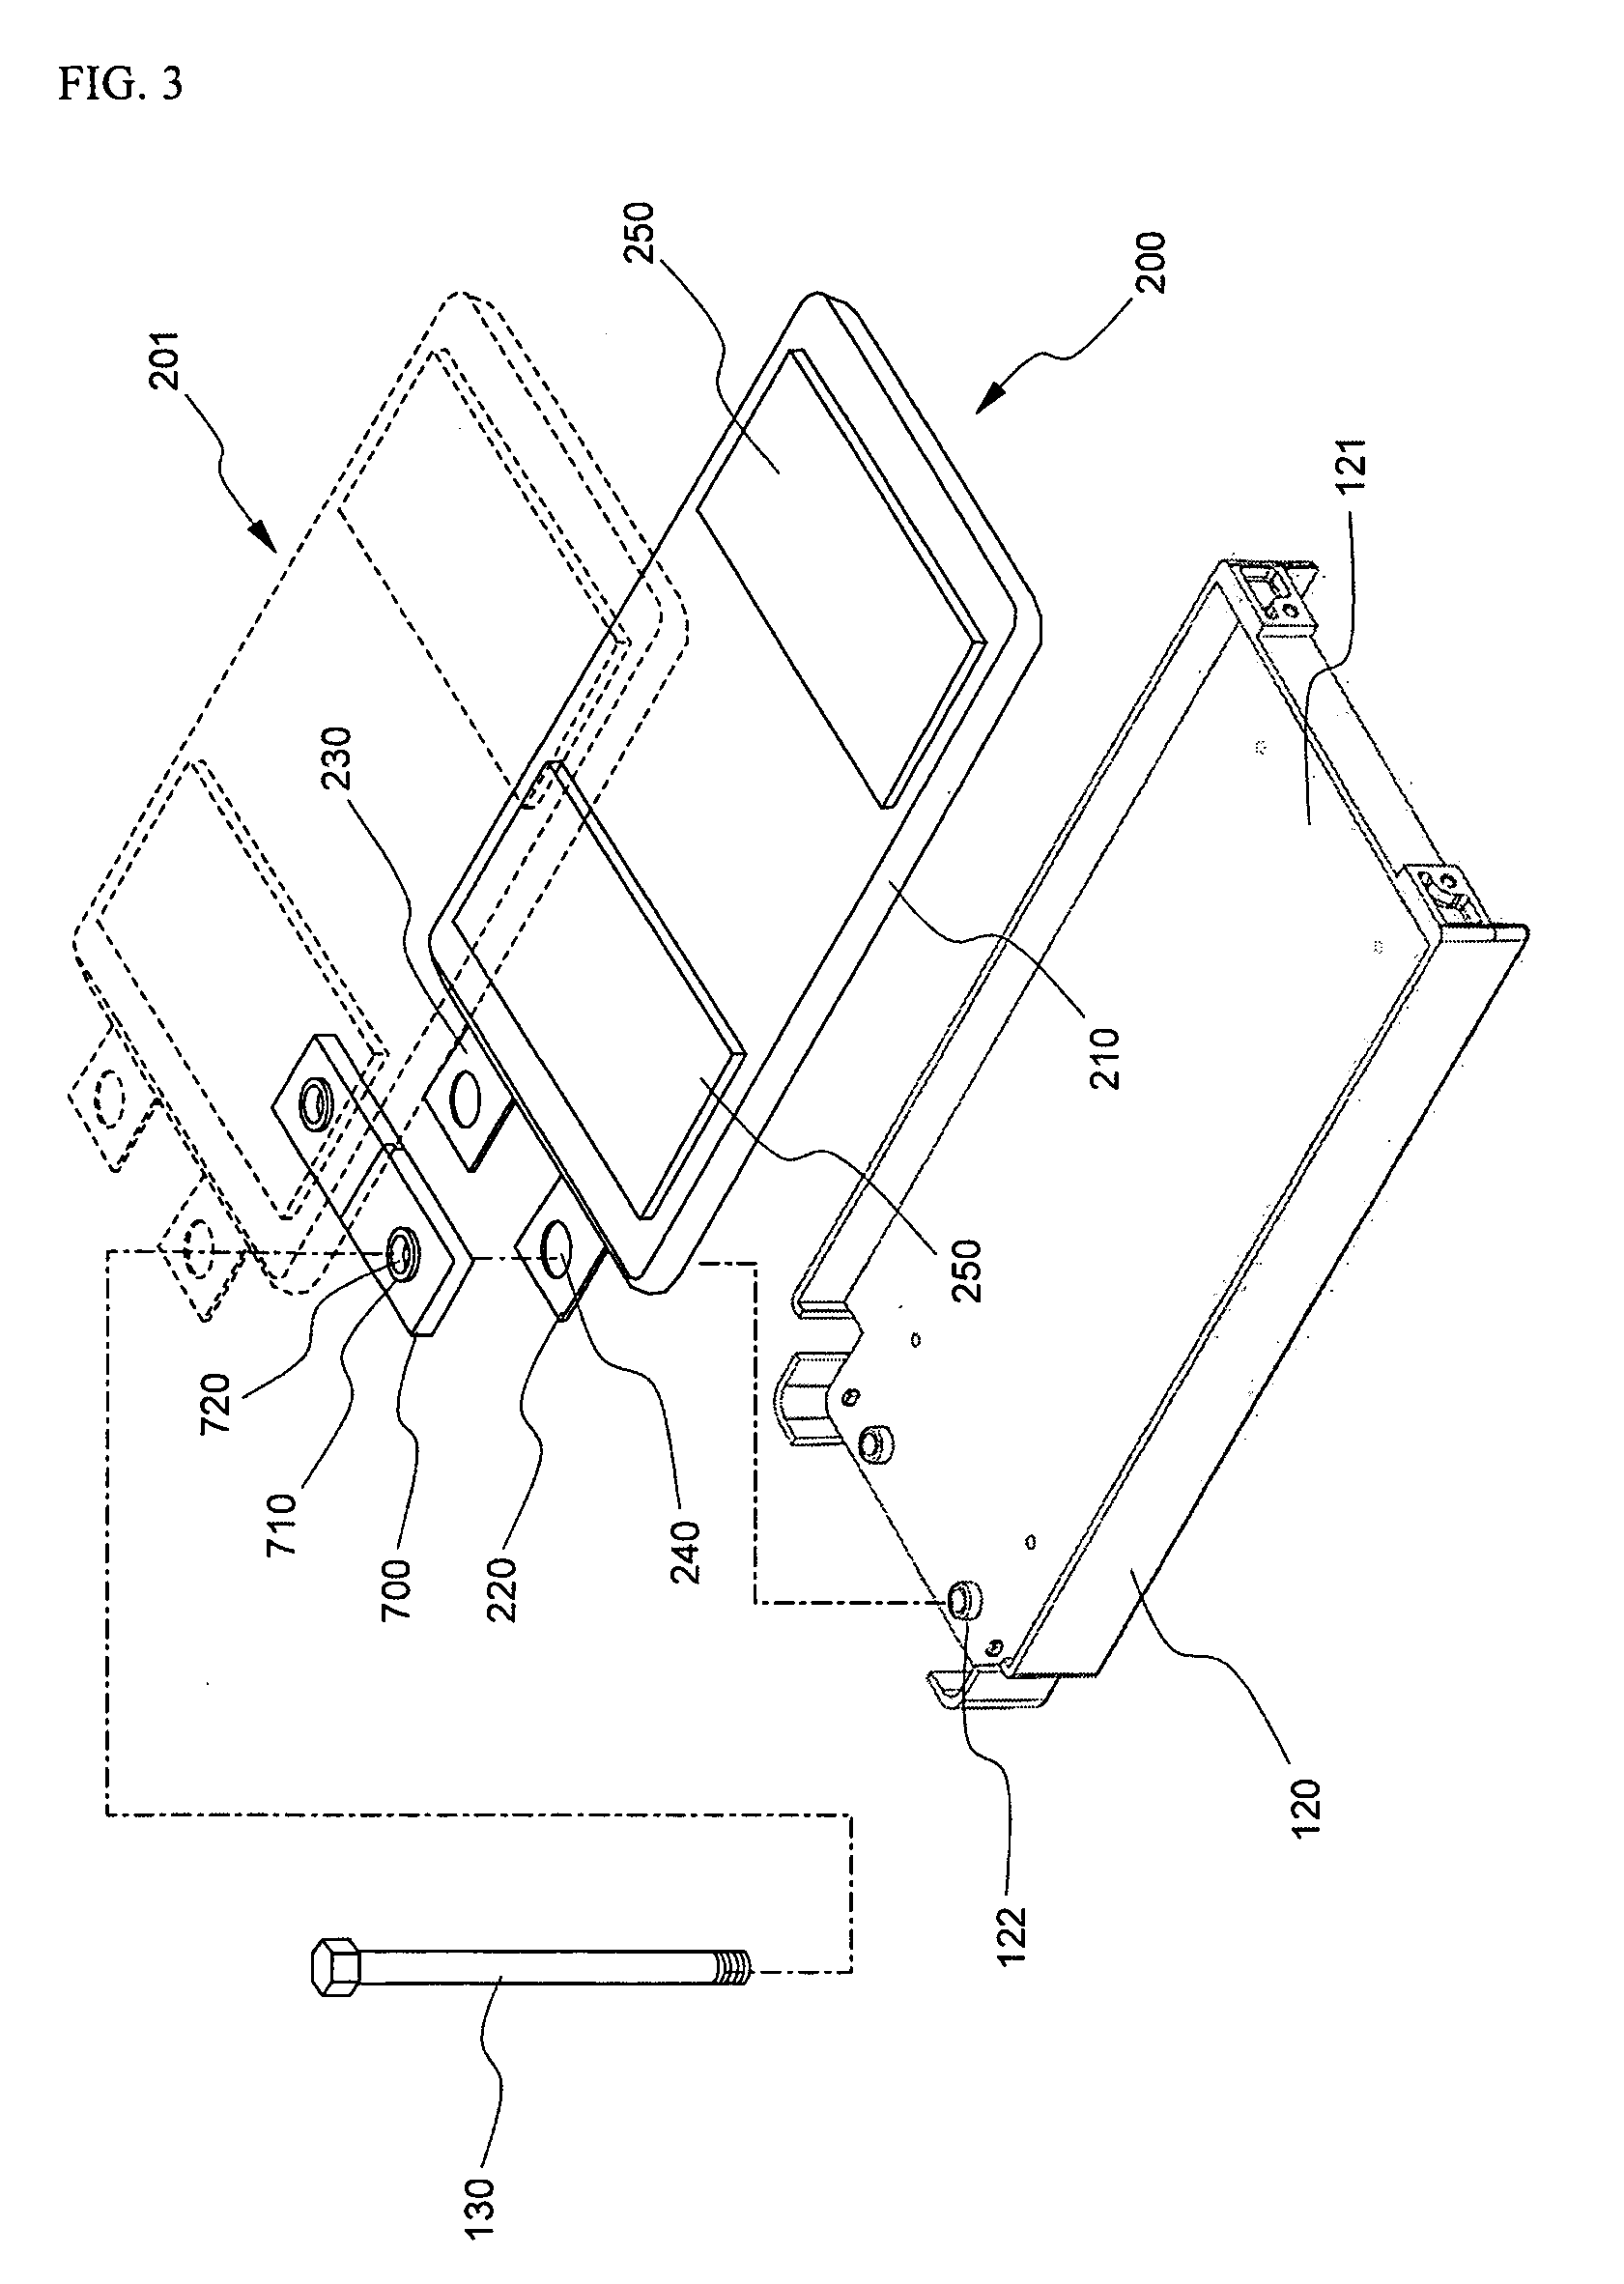 Sensing board assembly for secondary battery module